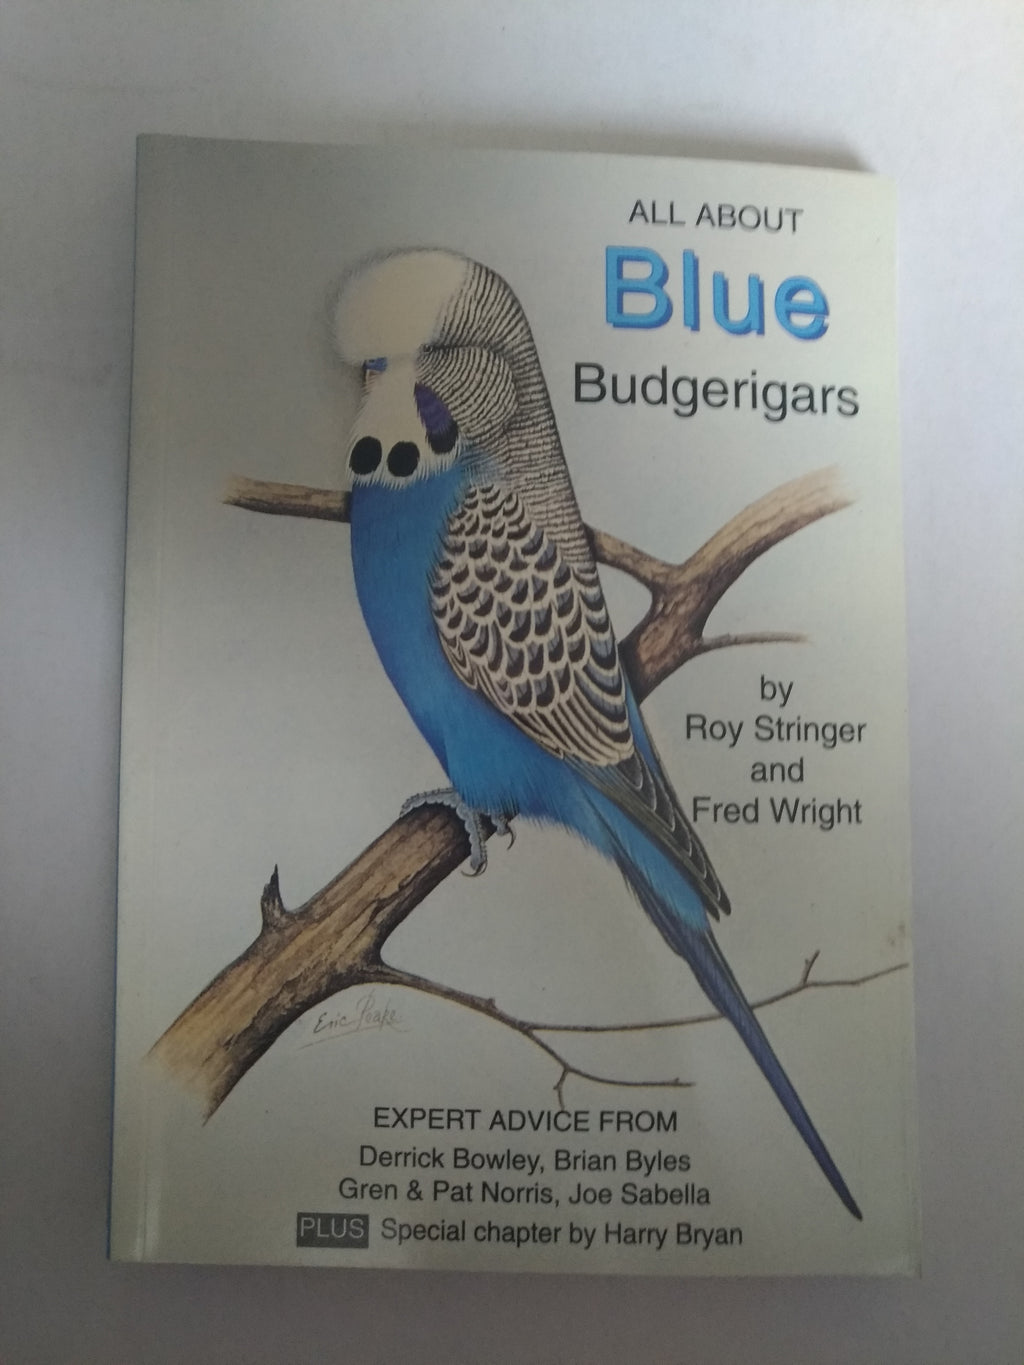 All About Blue Budgerigars by Fred Wright and Roy Stringer (New)